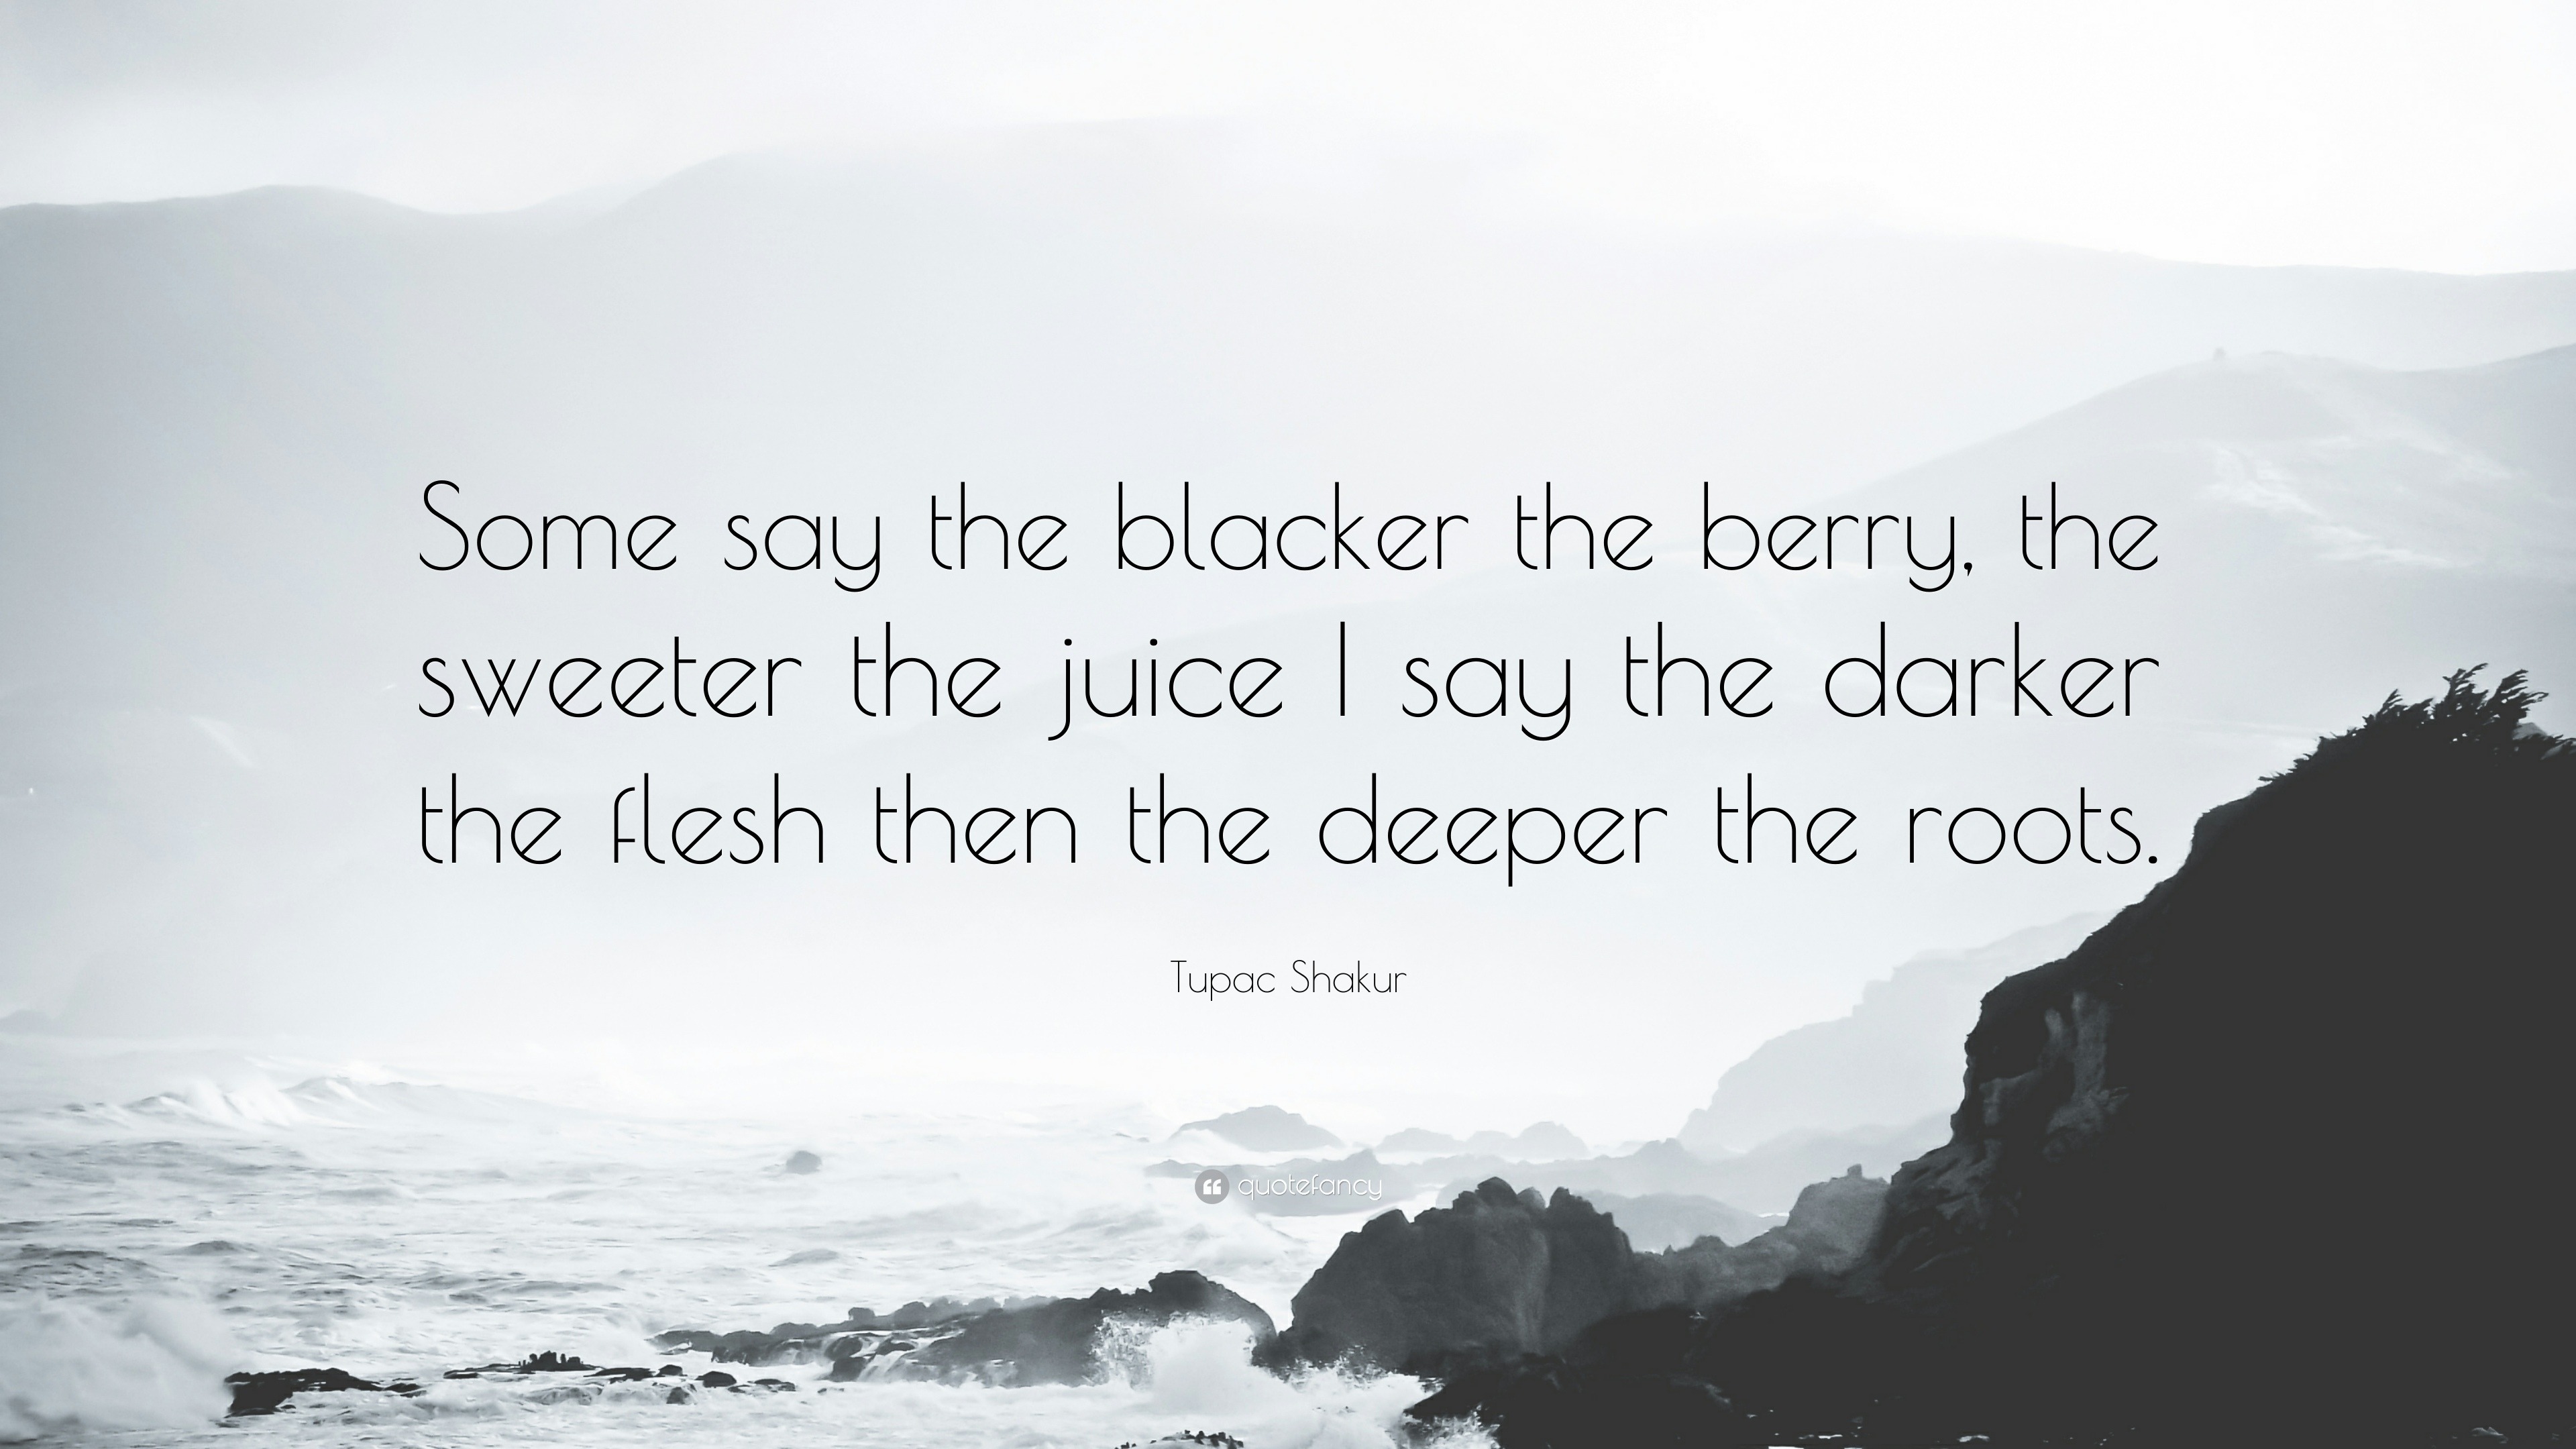 Tupac Shakur Quote: "Some say the blacker the berry, the sweeter the j...